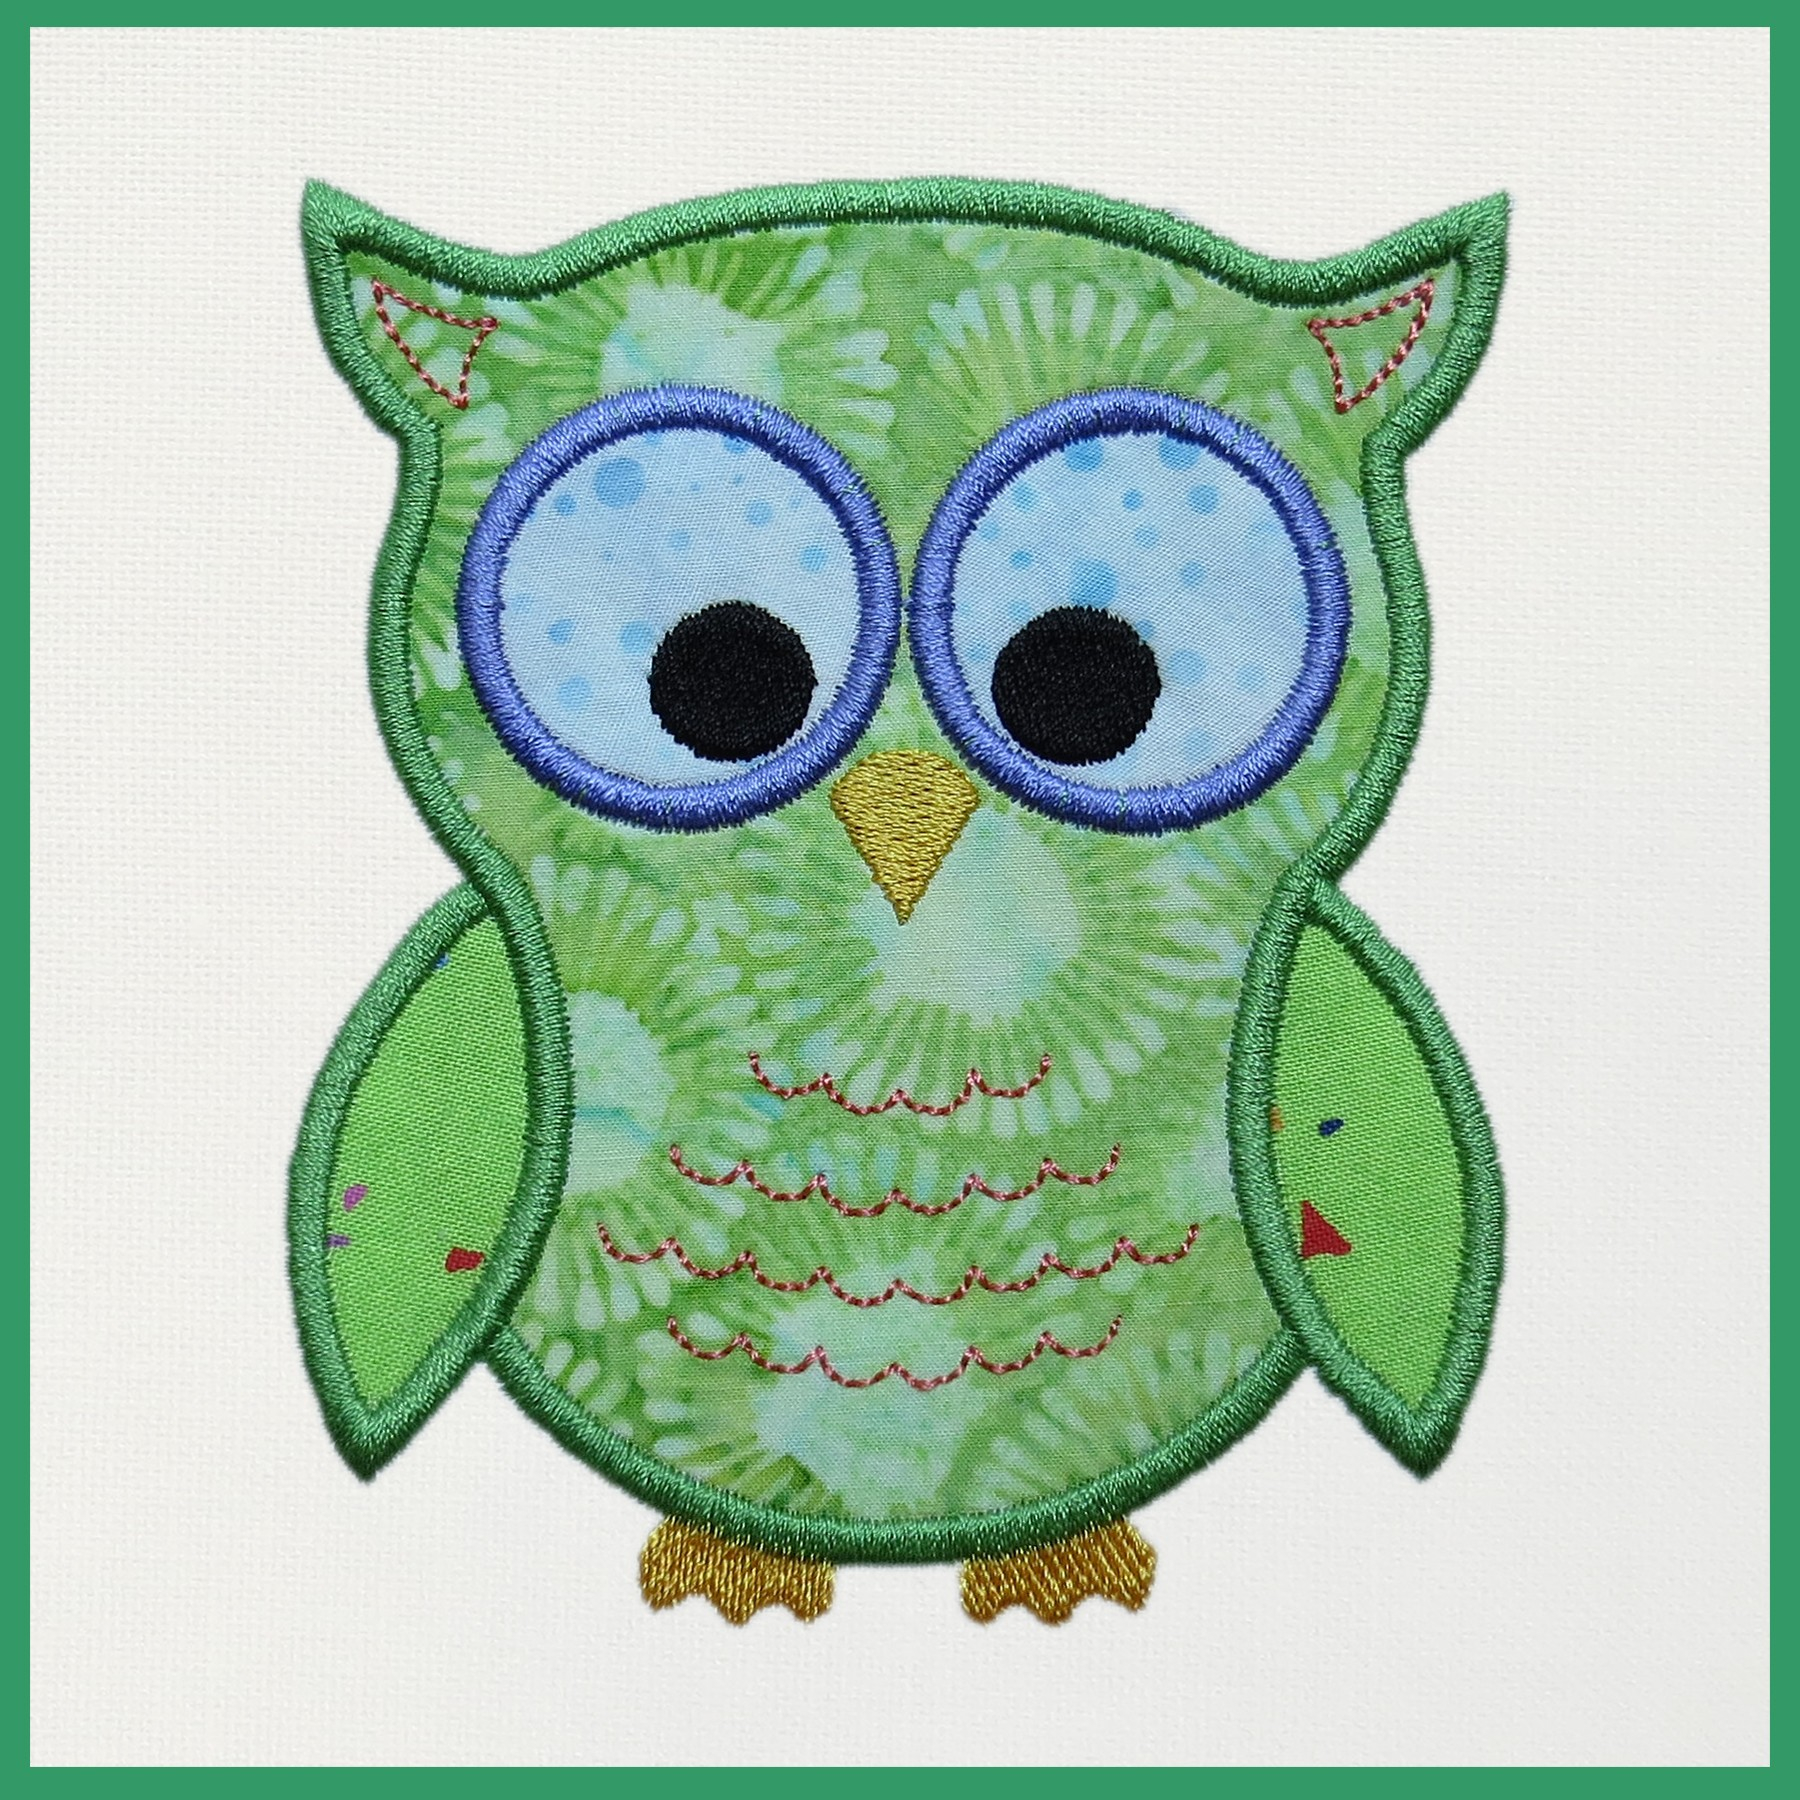 Owl Embroidery Pattern 14 Owl Embroidery Designs Free Download Images Free Owl Applique